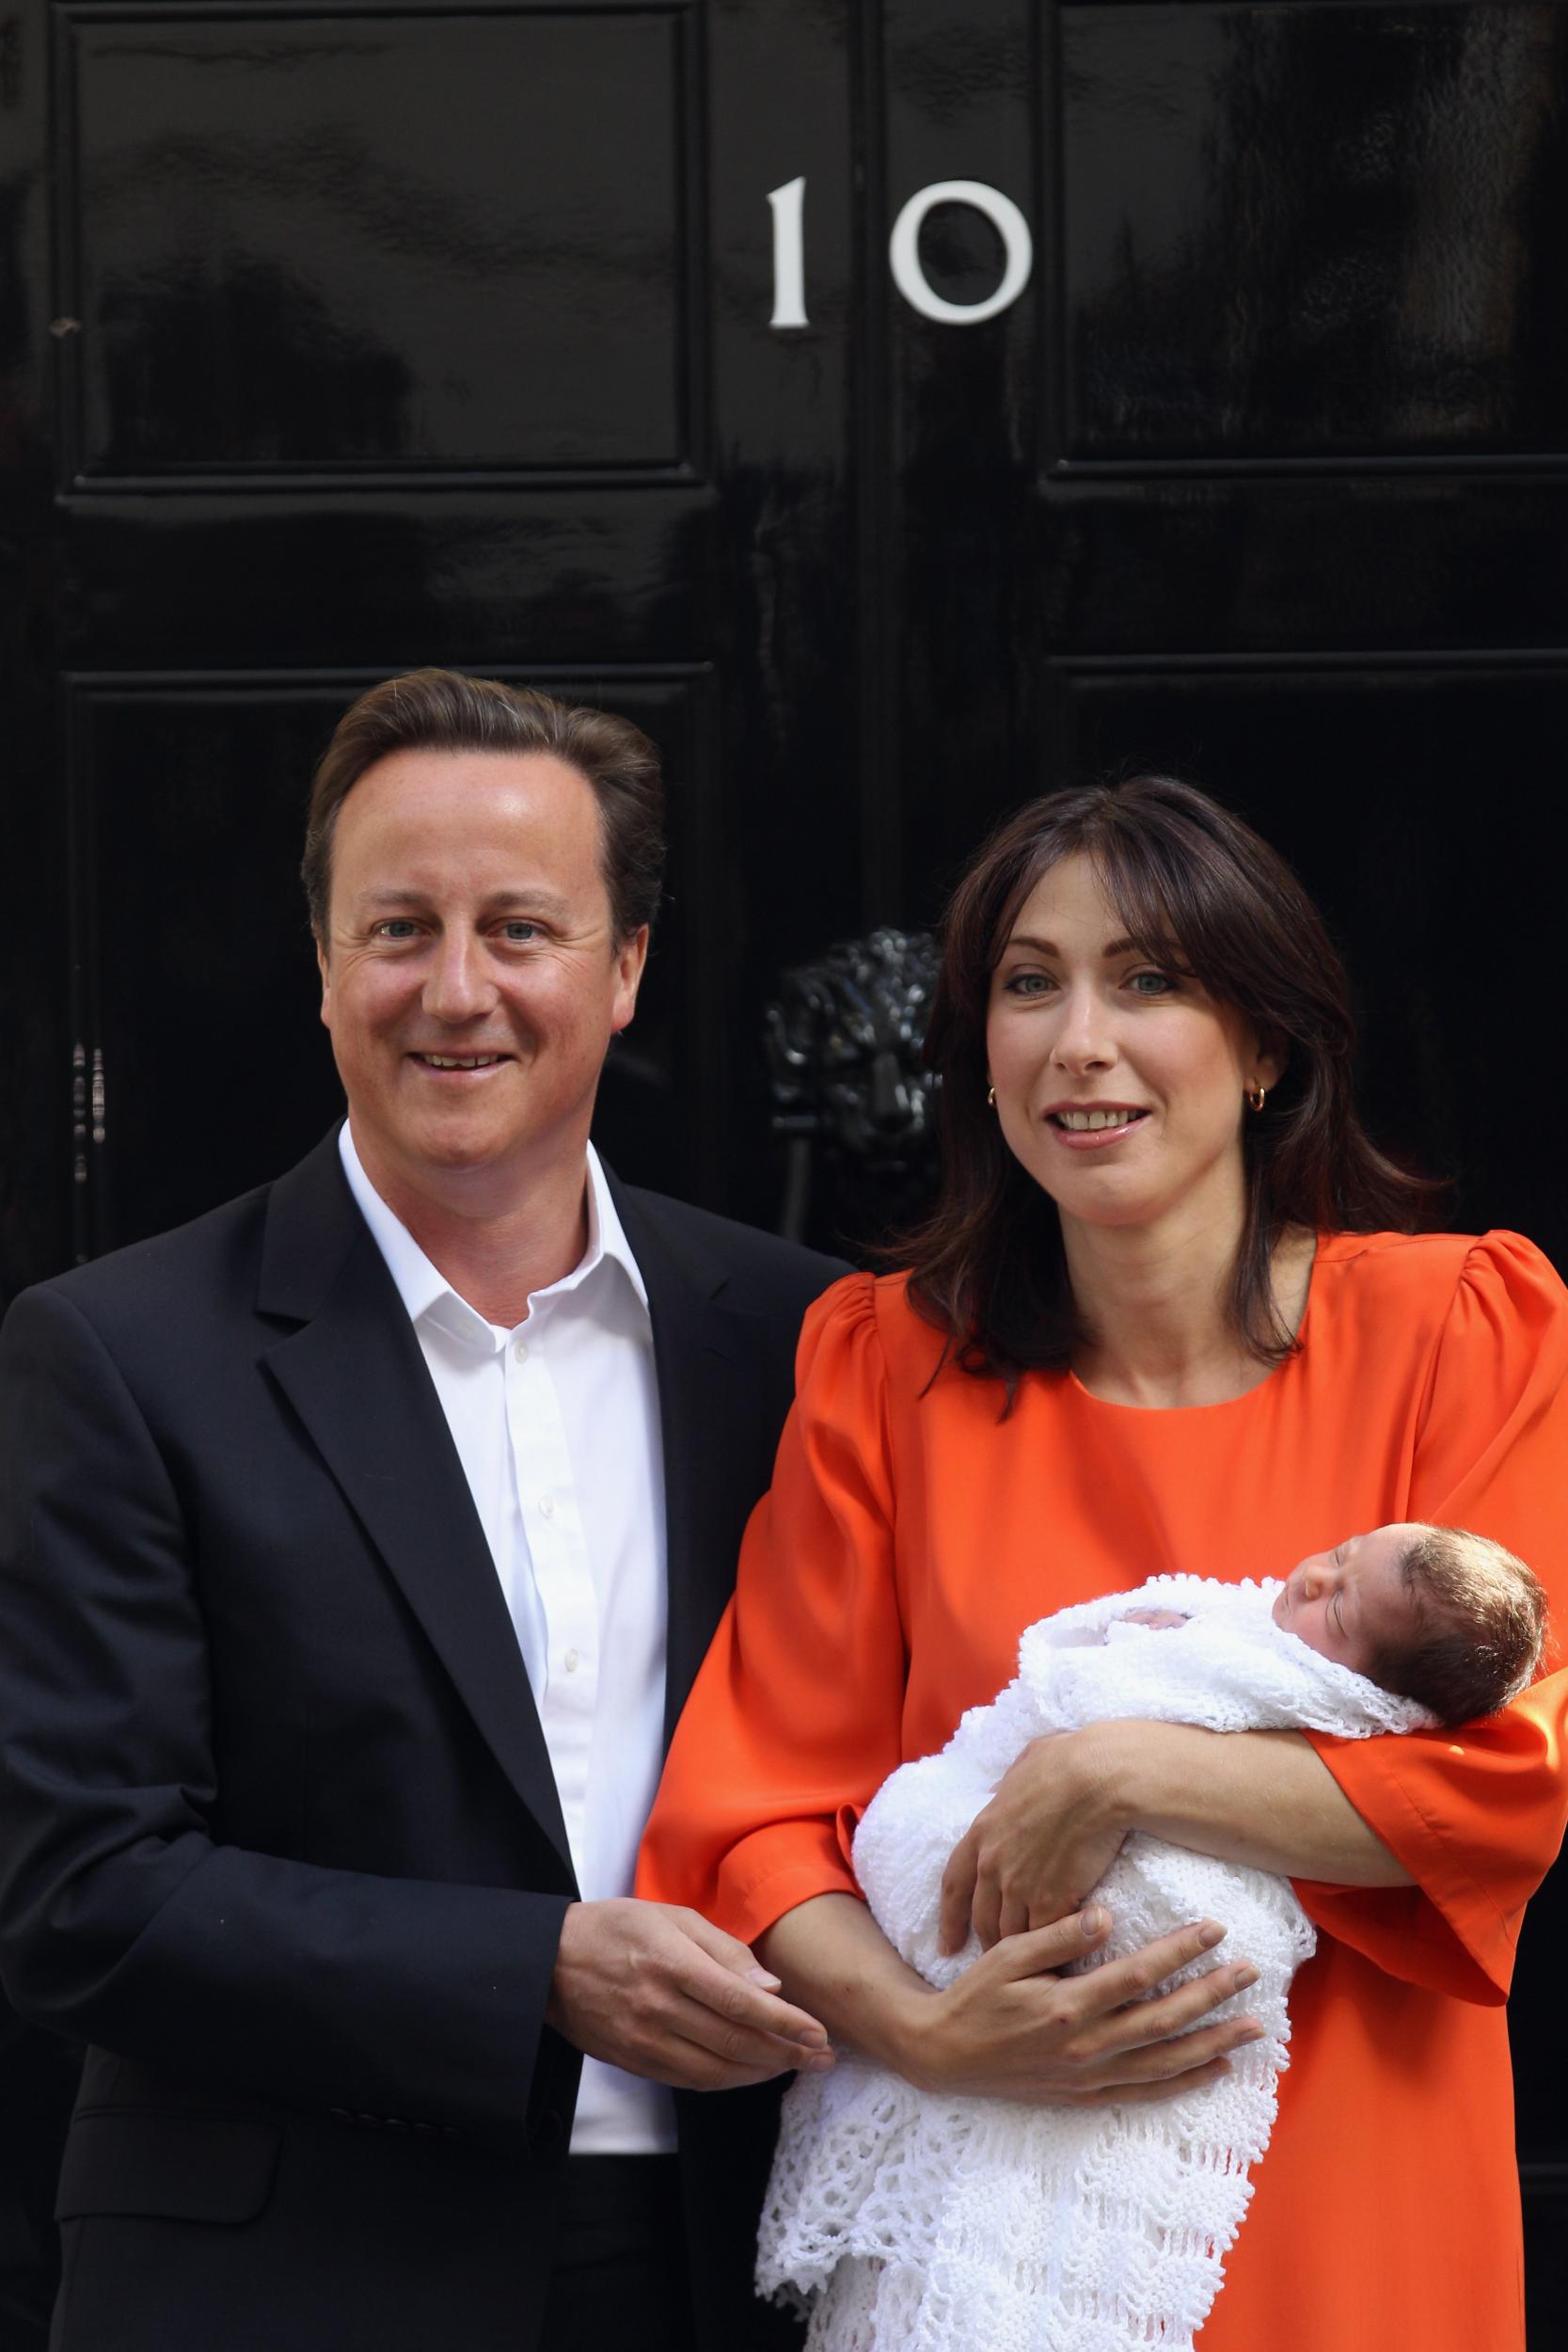 David and Samantha Cameron with baby daughter Florence Rose Endellion outside 10 Downing Street on 3 September 2010